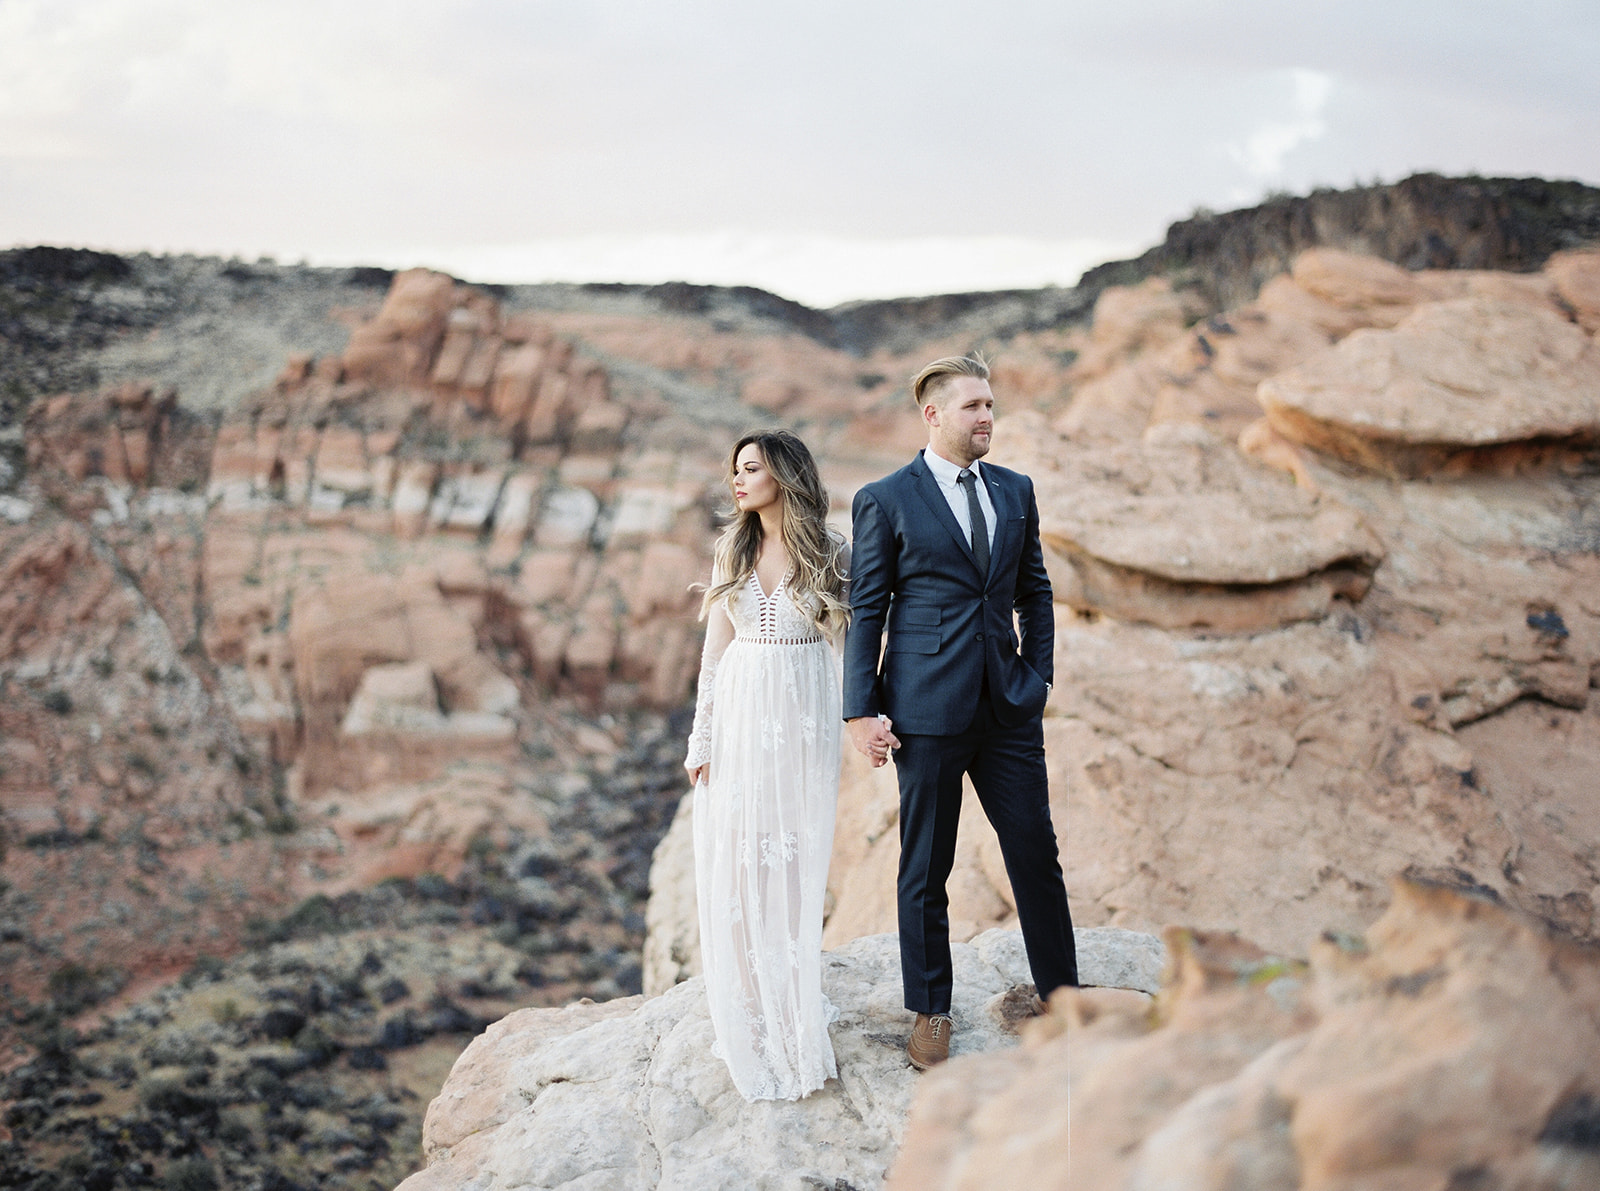 intimate moment with a bride and groom during their elopement day in Zion National Park.